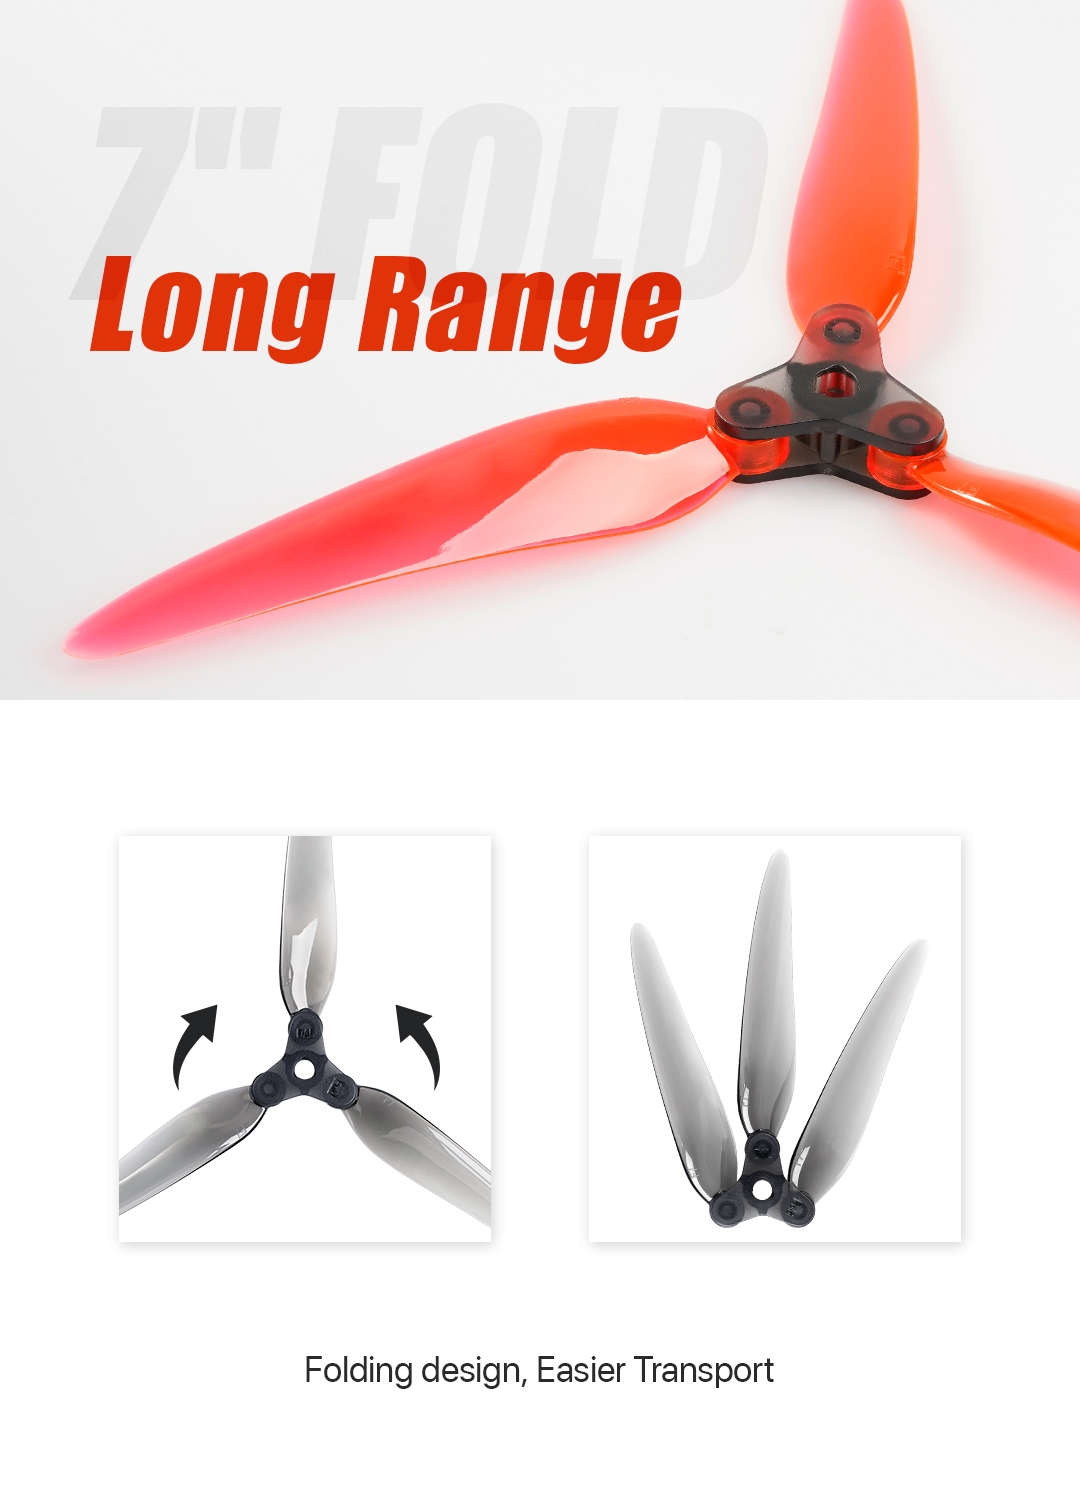 2 Pairs Dalprop F7 7 Inch Folding Propeller Smooth DIY Props Long Range Compatible POPO for FPV Racing RC Drone